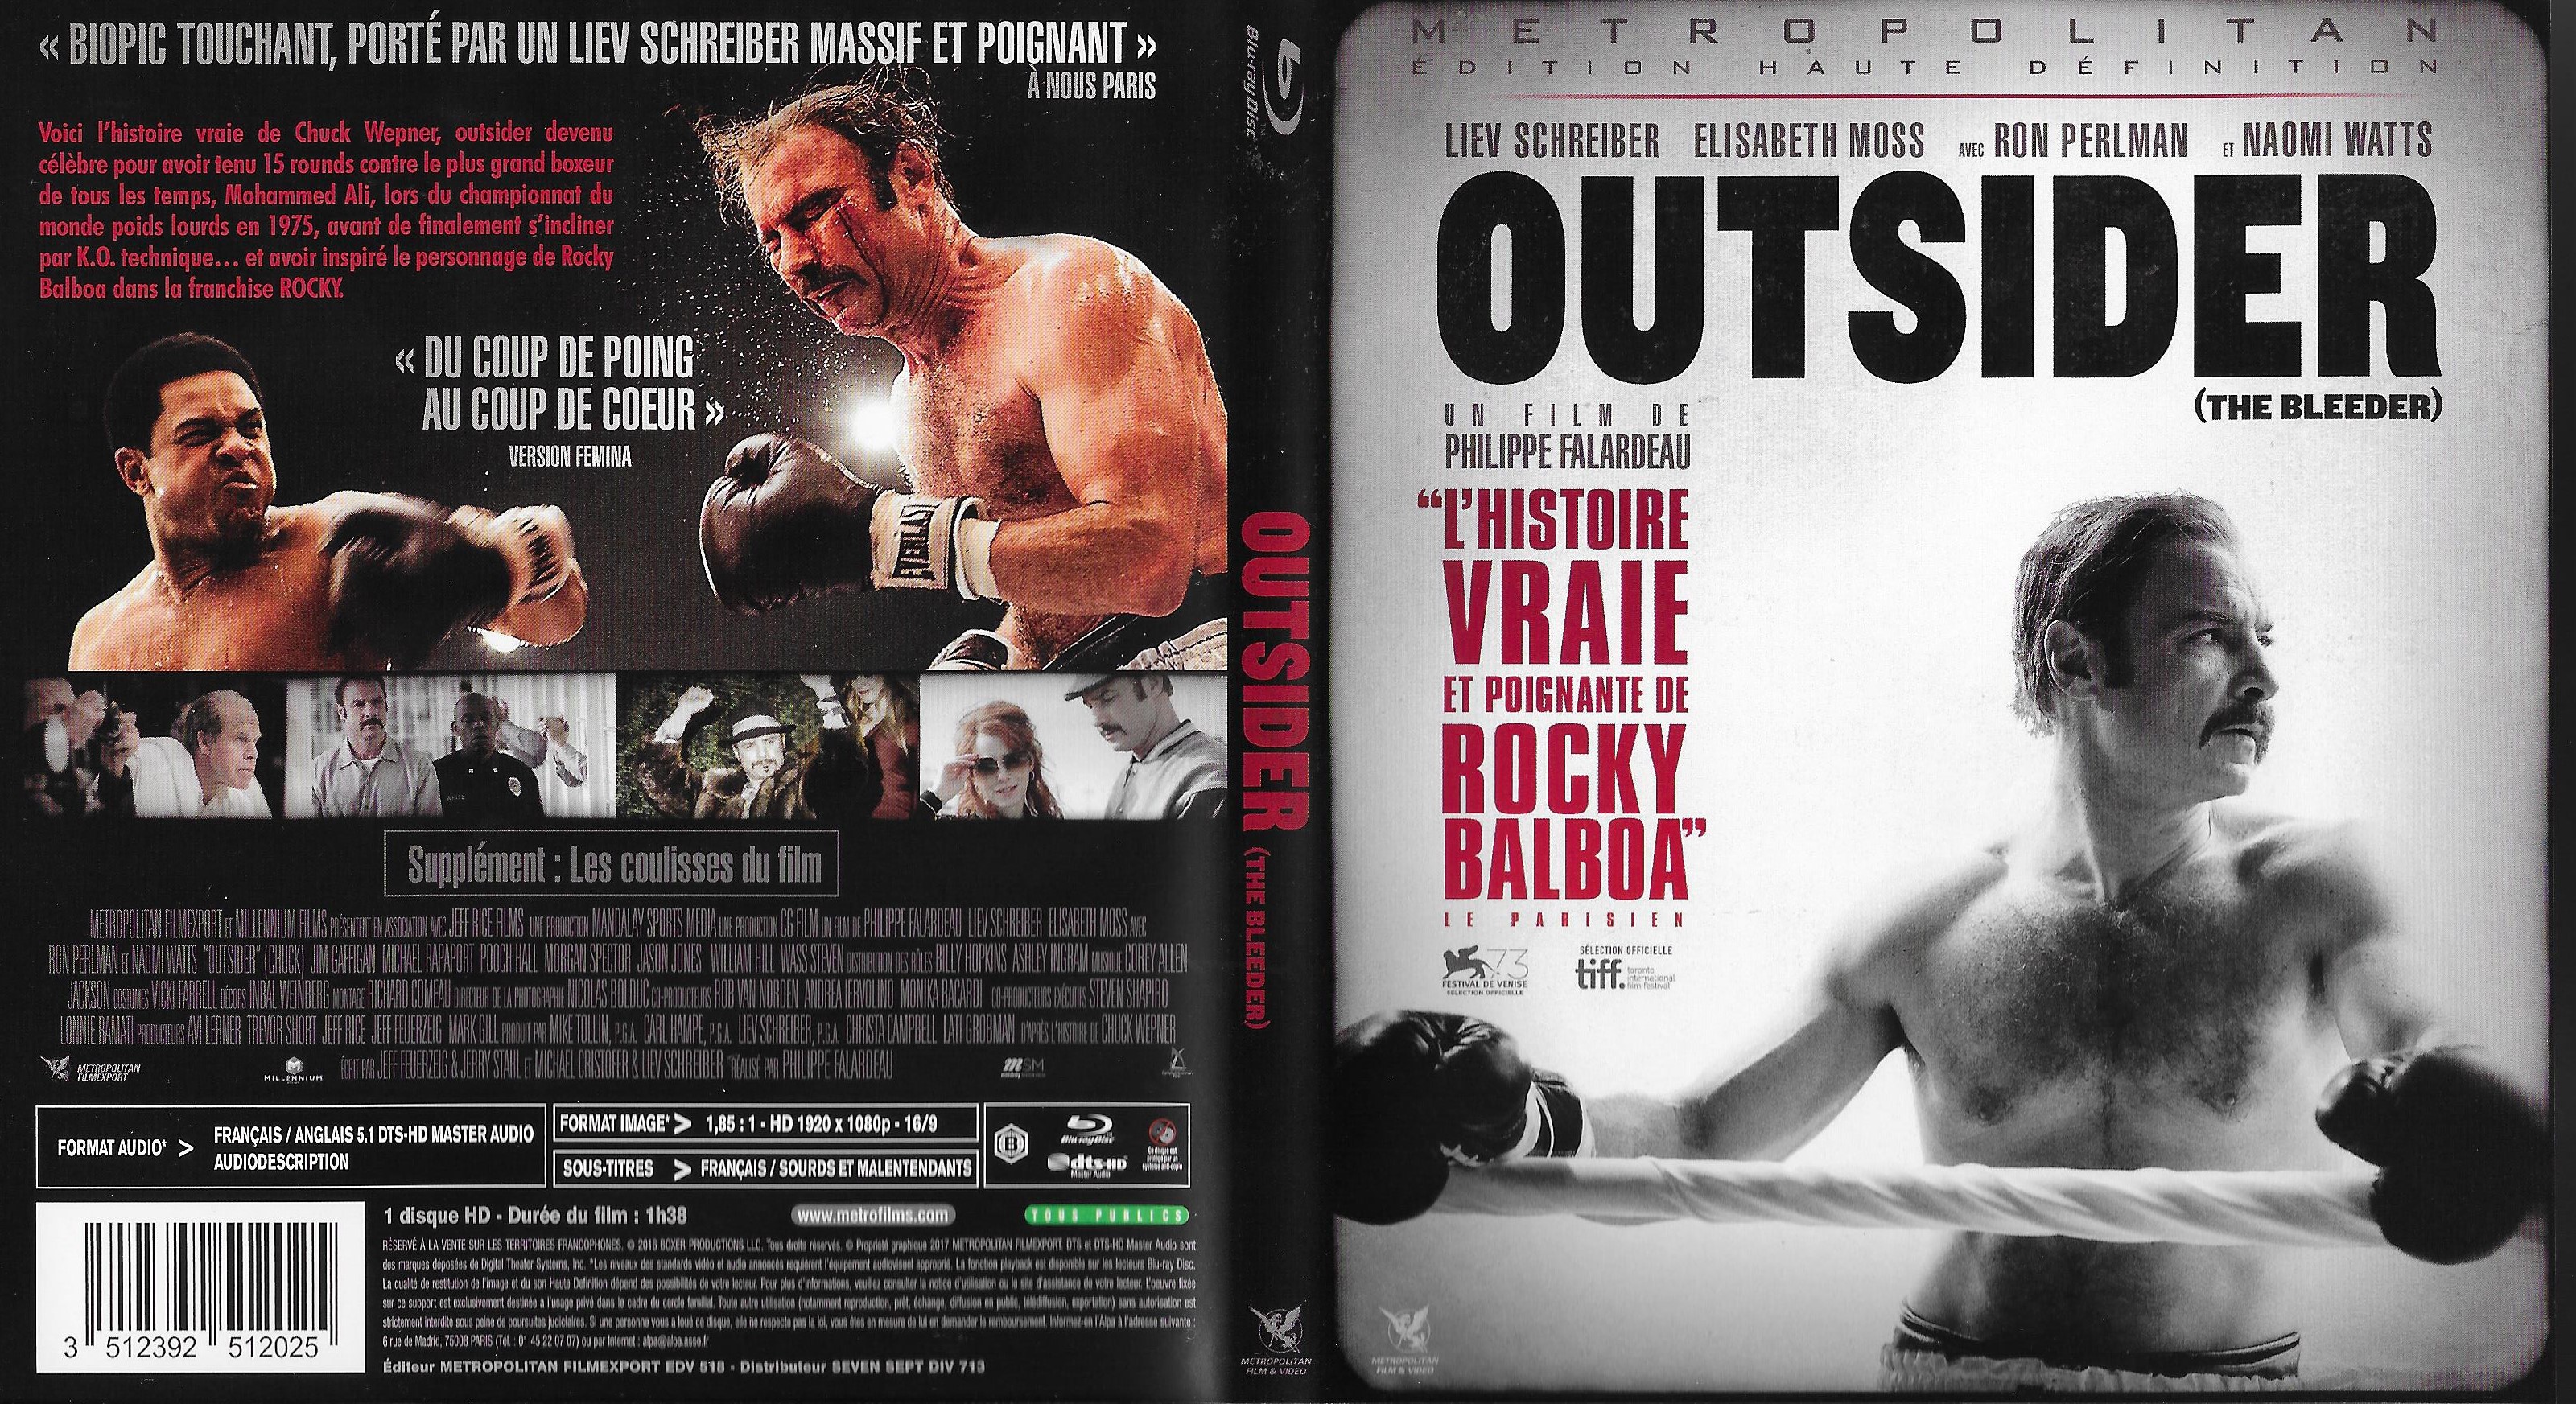 Jaquette DVD Outsider (BLU-RAY)